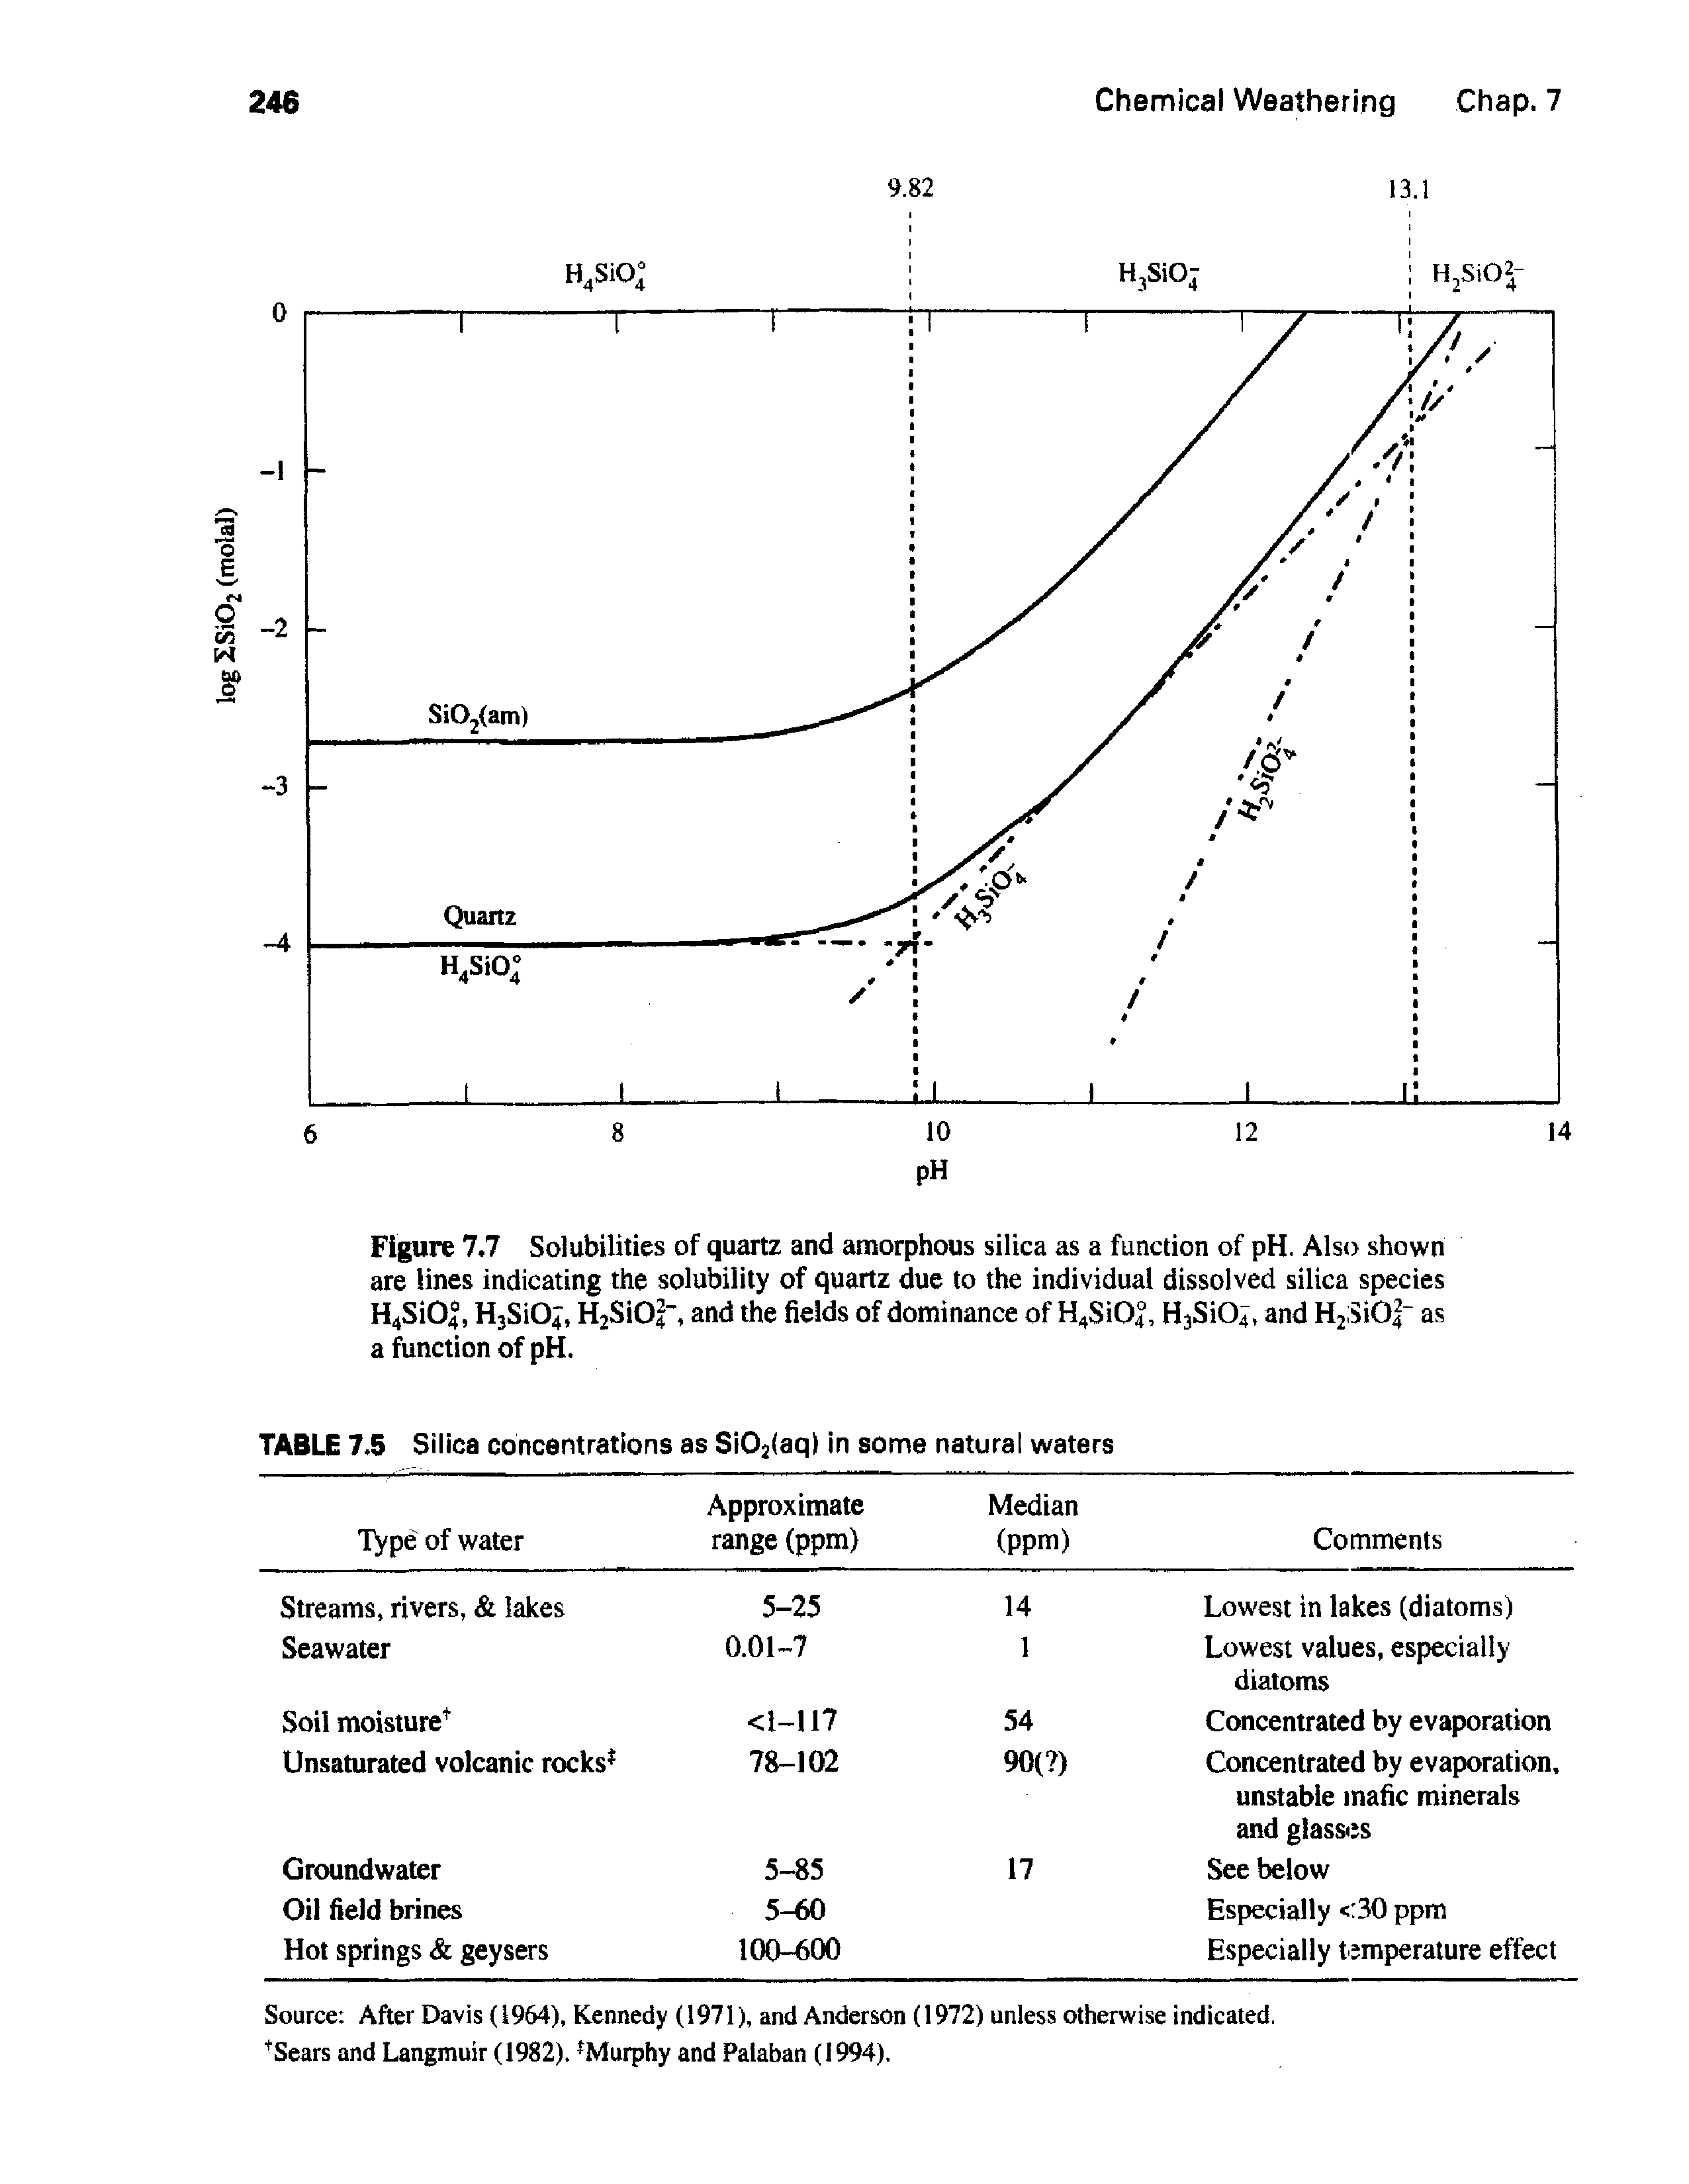 Figure 7.7 Solubilities of quartz and amorphous silica as a function of pH. Also shown are lines indicating the solubility of quartz due to the individual dissolved silica species H4Si04, HsSiO, H2SiOj", and the fields of dominance of H4Si04, HsSiO, and H2SiO as a function of pH.